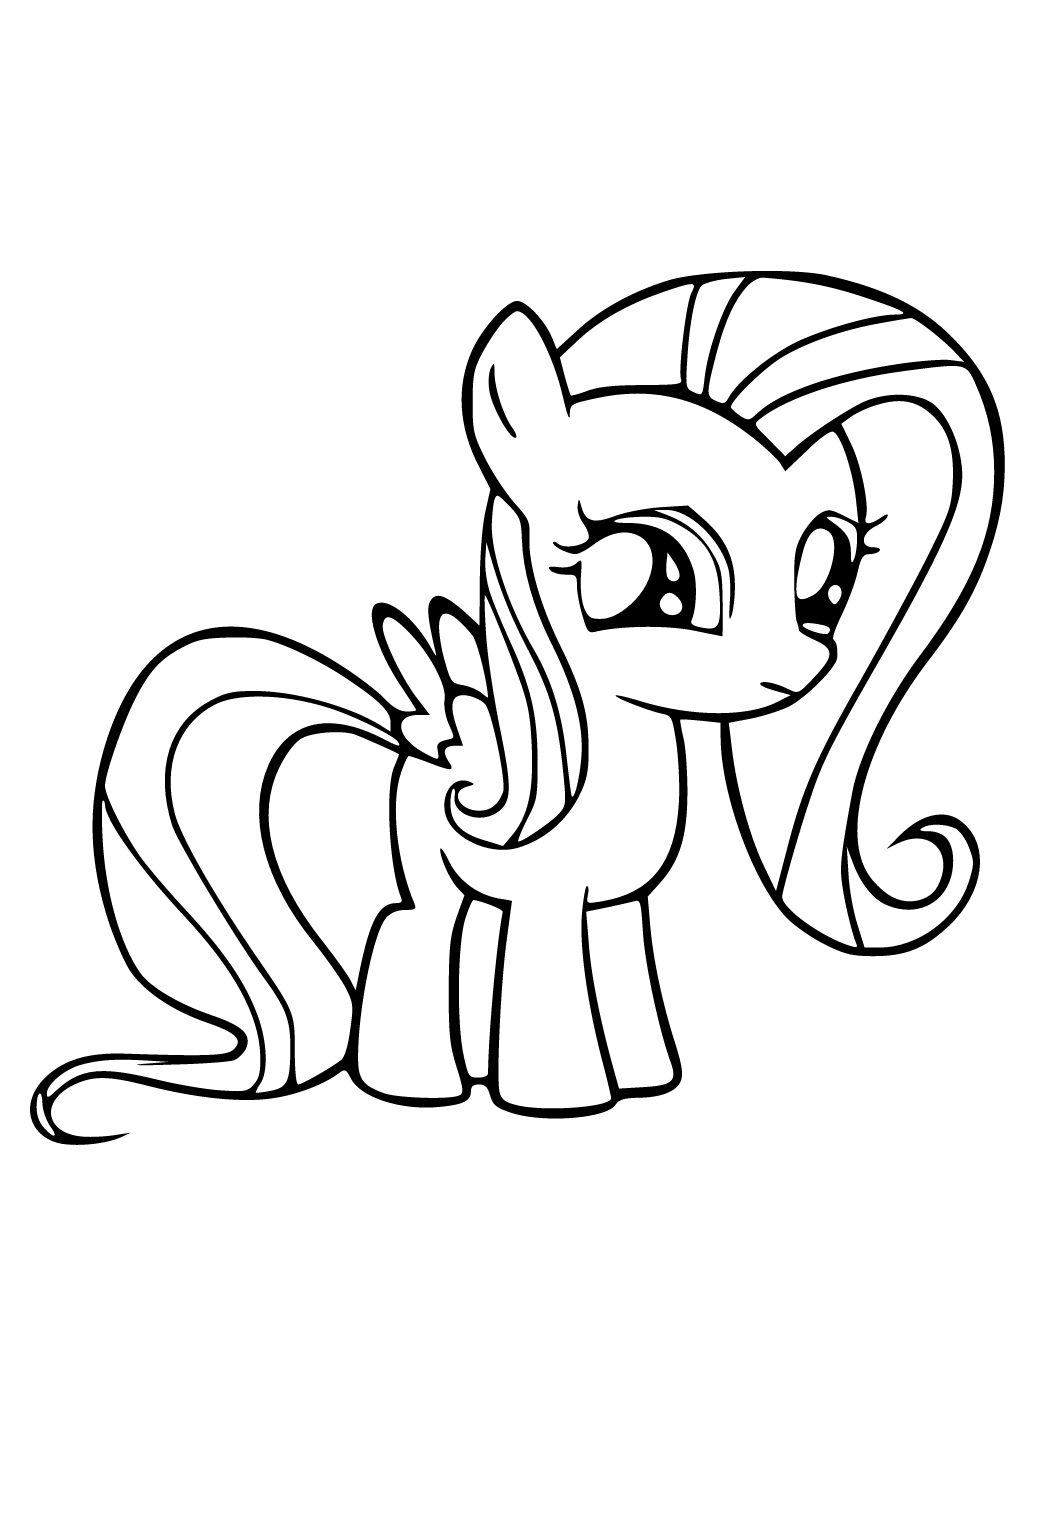 Free Printable My Little Pony Fluttershy Coloring Page, Sheet and Picture  for Adults and Kids (Girls and Boys) 